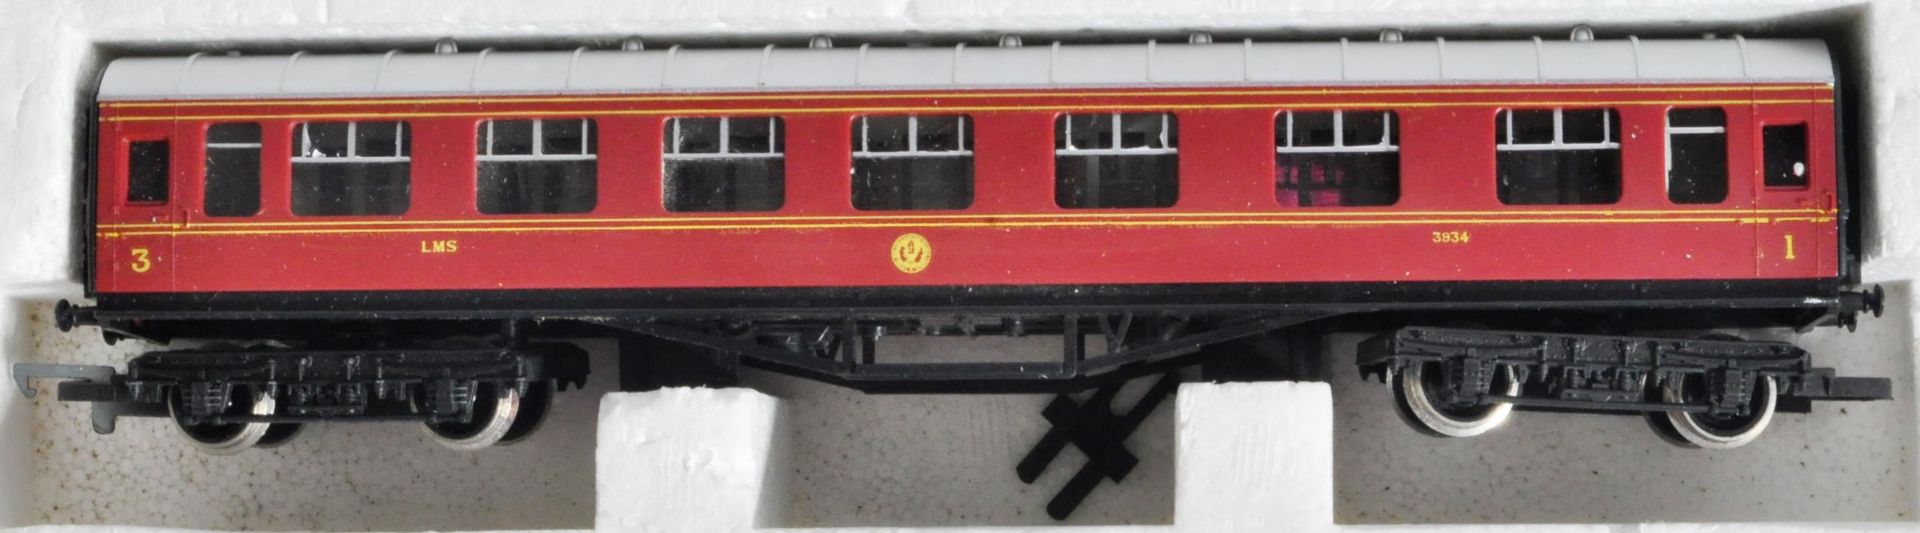 COLLECTION OF X4 ASSORTED HORNBY 00 GAUGE TRAINSETS - Image 3 of 12